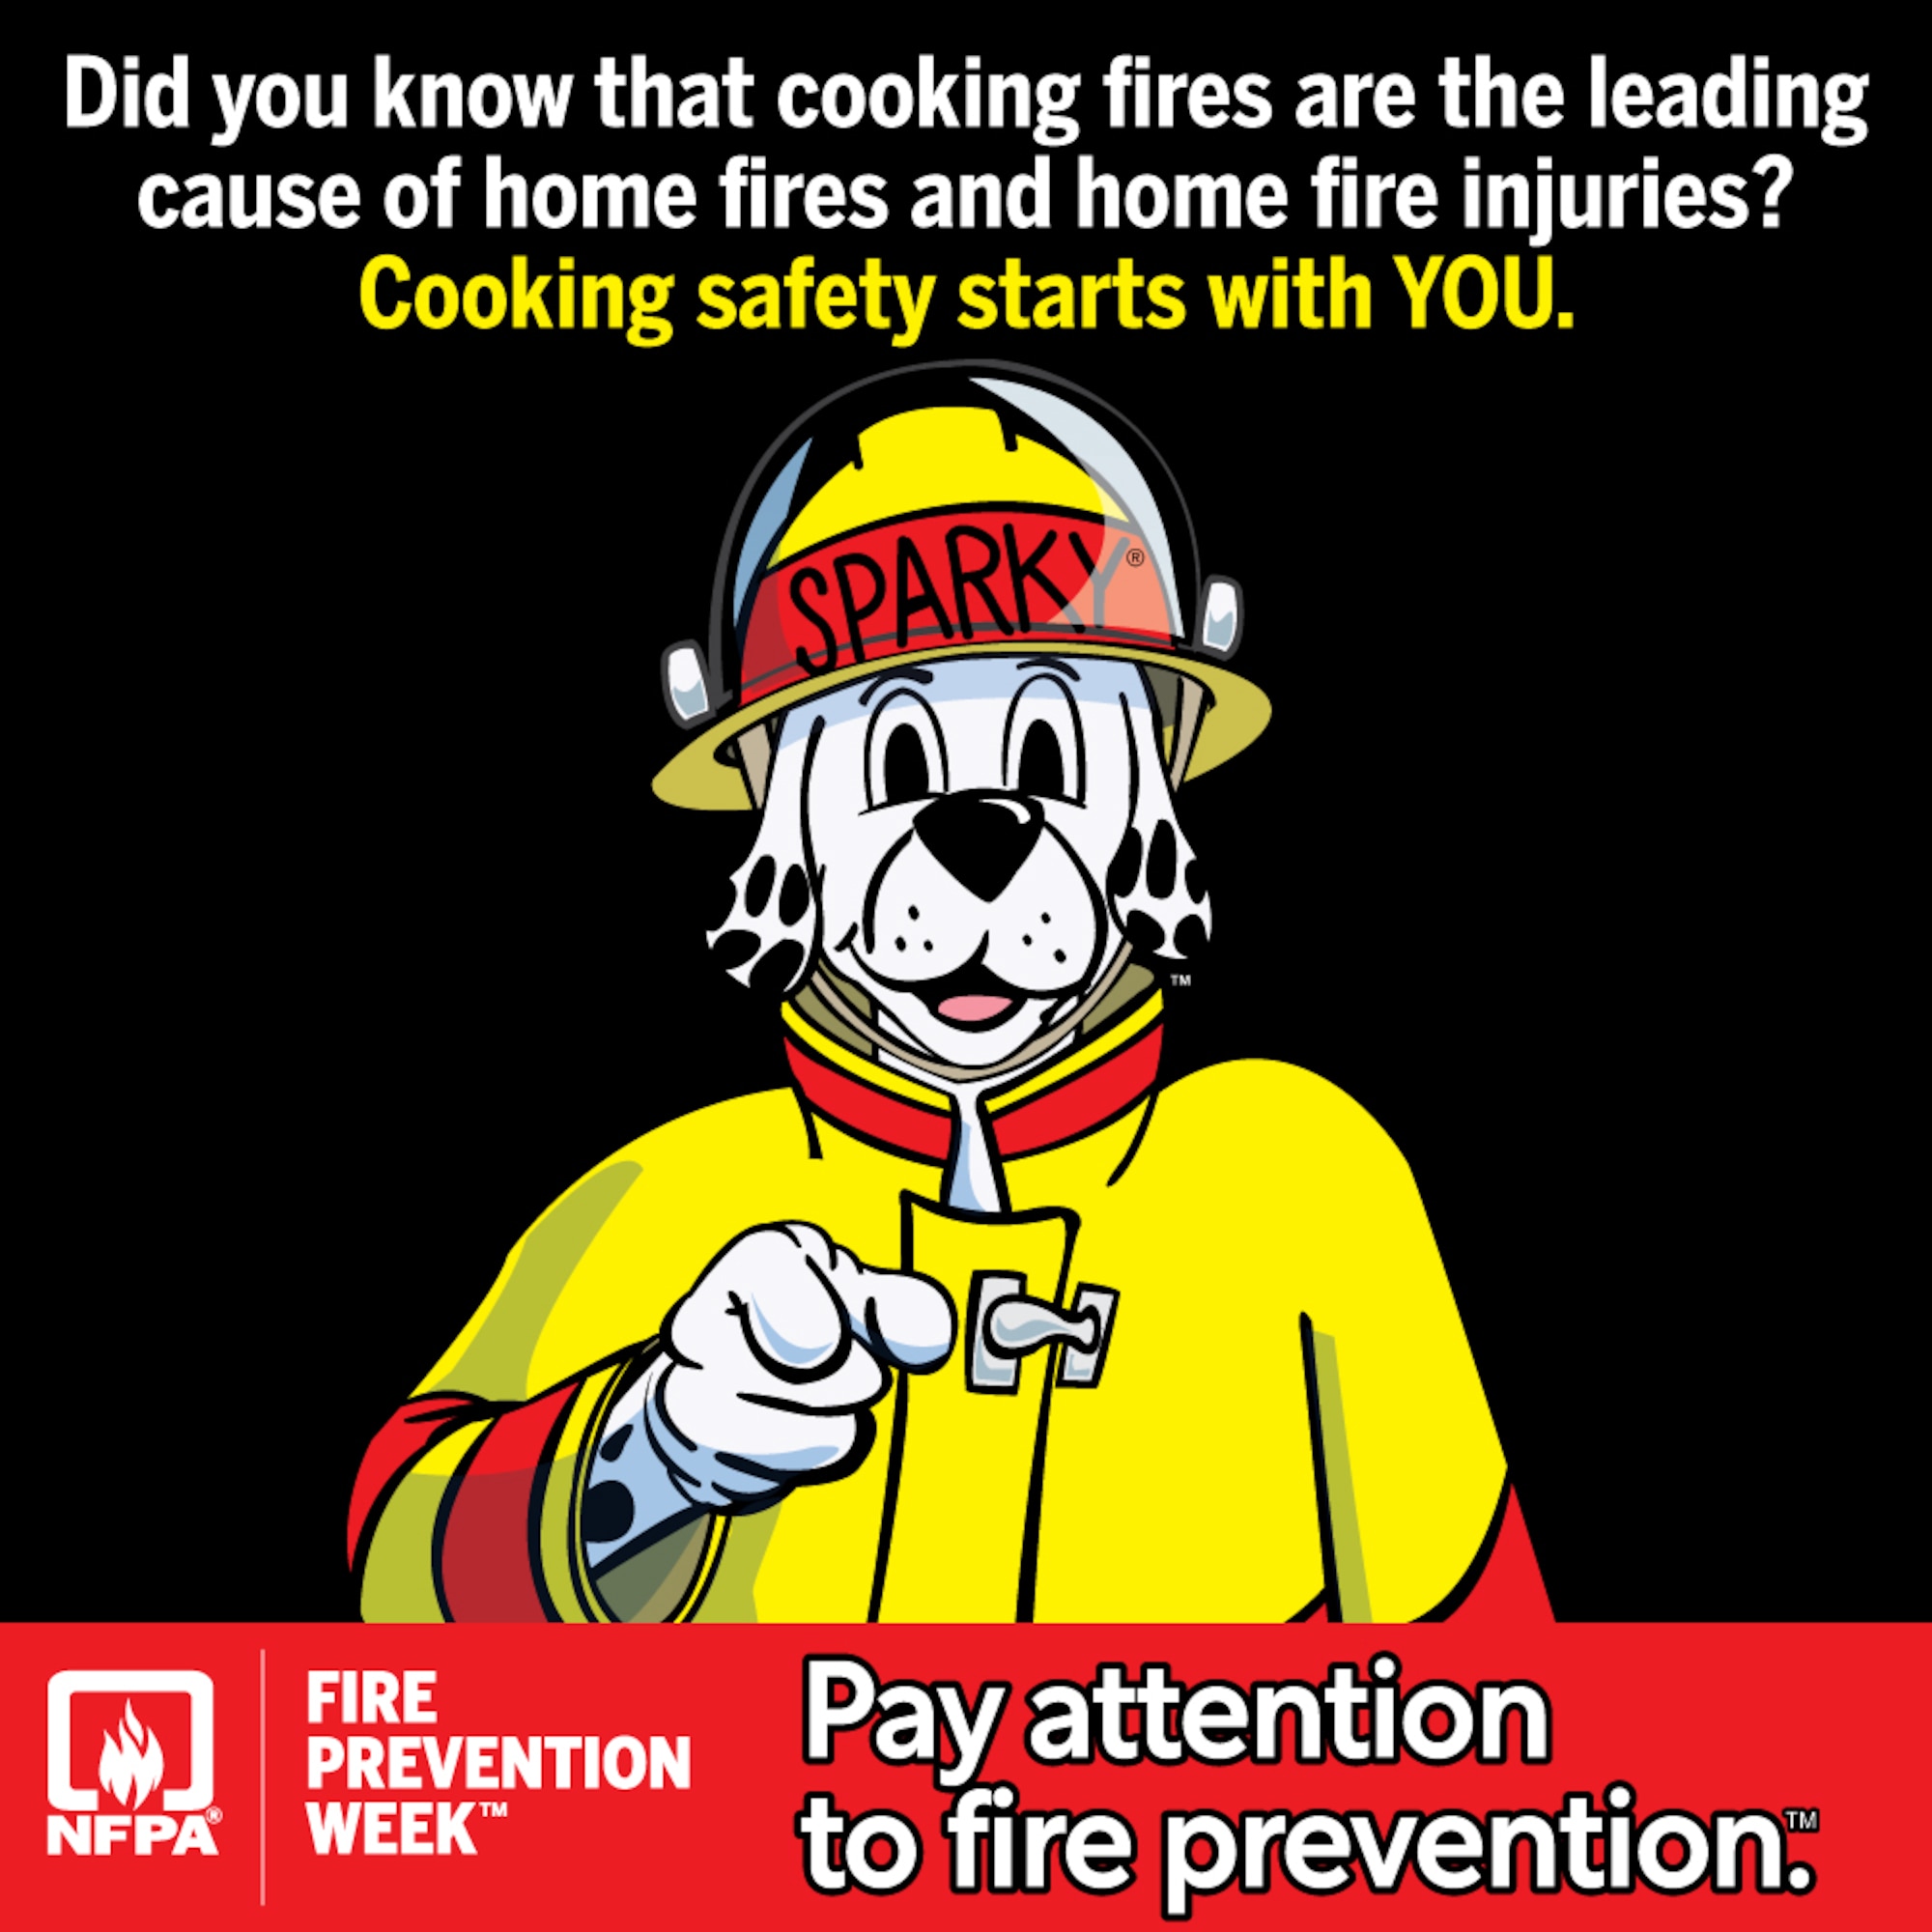 Fire Prevention Week, sponsored by the National Fire Protection Association, is Oct. 8-14. The theme of this year’s Fire Prevention Week campaign is “Cooking safety starts with YOU. Pay attention to fire prevention.” Arnold Air Force Base Fire and Emergency Services officials are urging base personnel to practice cooking safety and be aware of the dangers associated with unattended cooking. (National Fire Protection Association graphic)